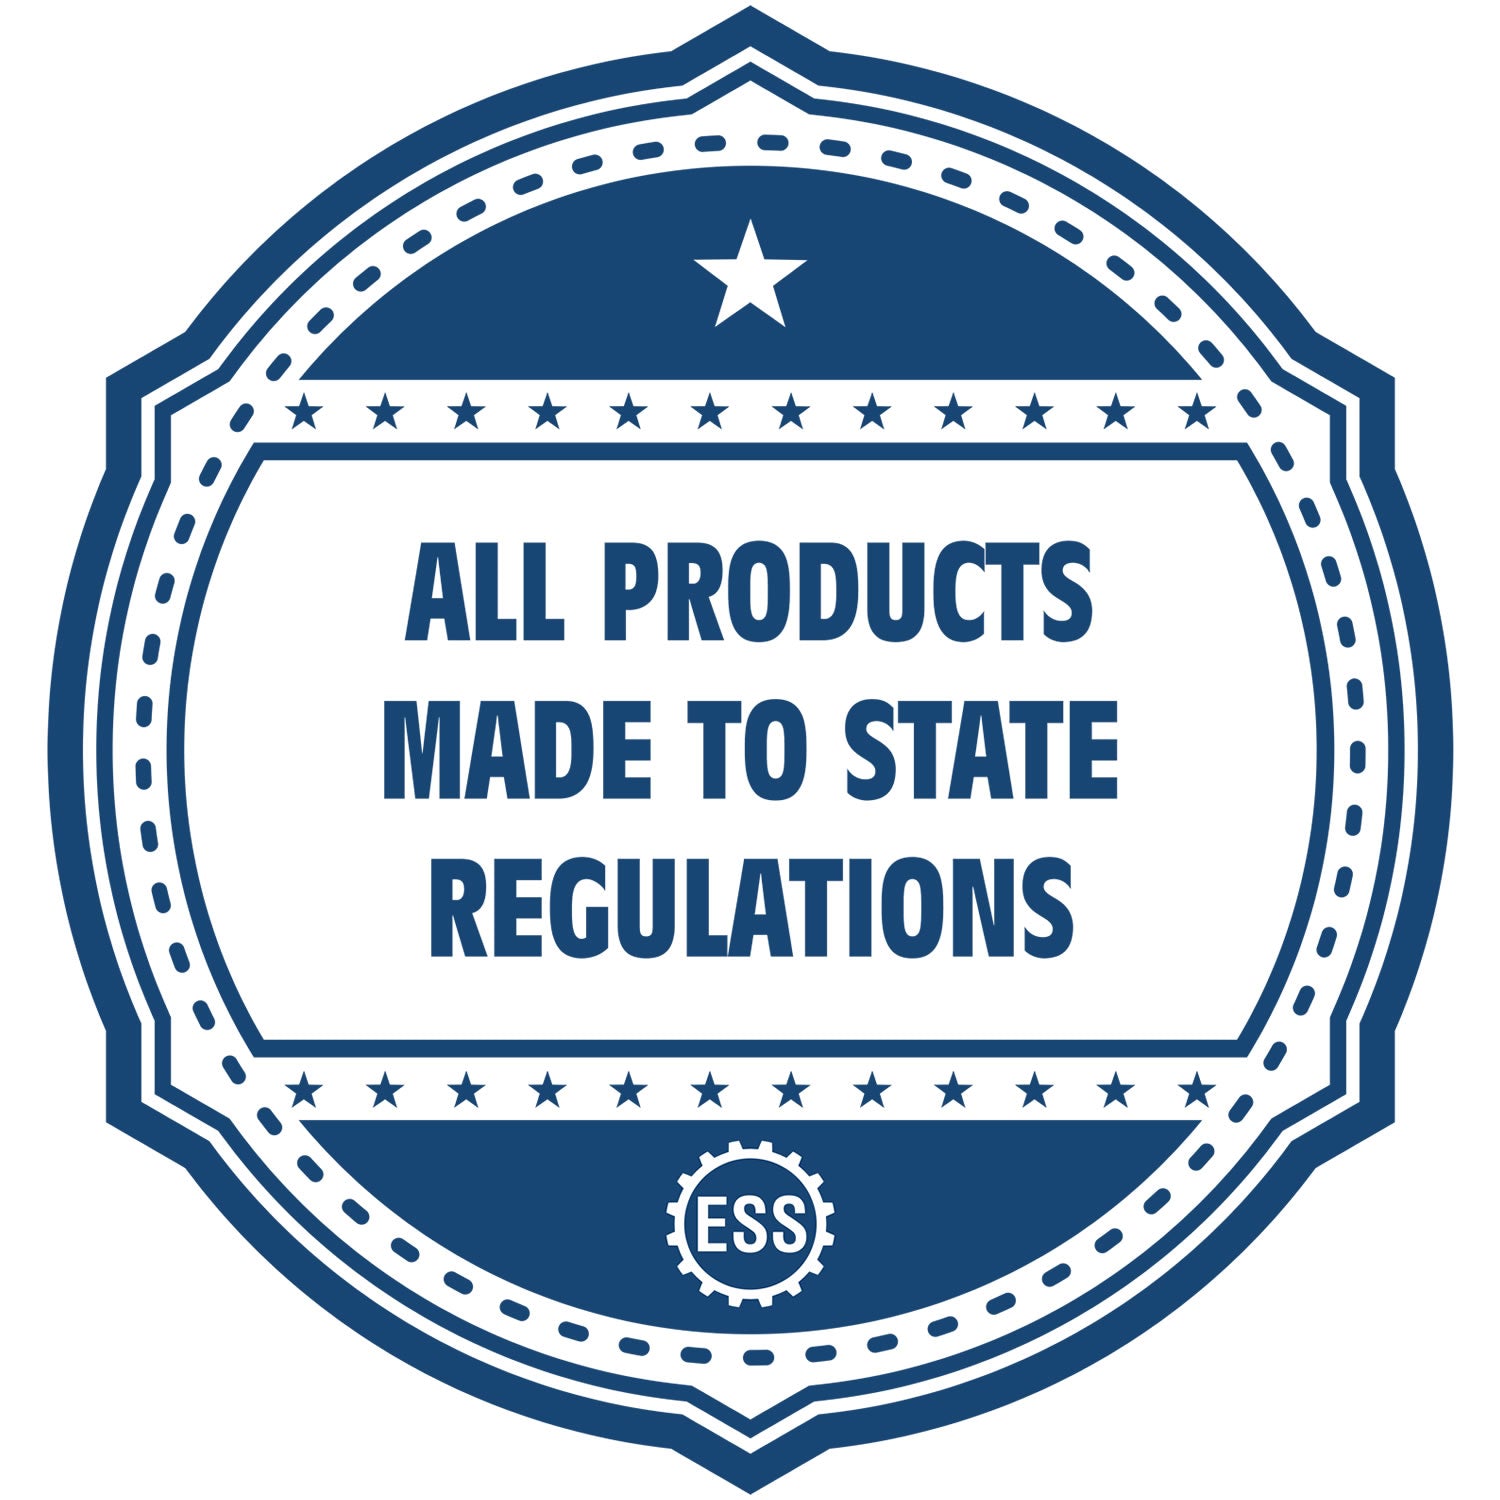 An icon or badge element for the Soft Oregon Professional Engineer Seal showing that this product is made in compliance with state regulations.